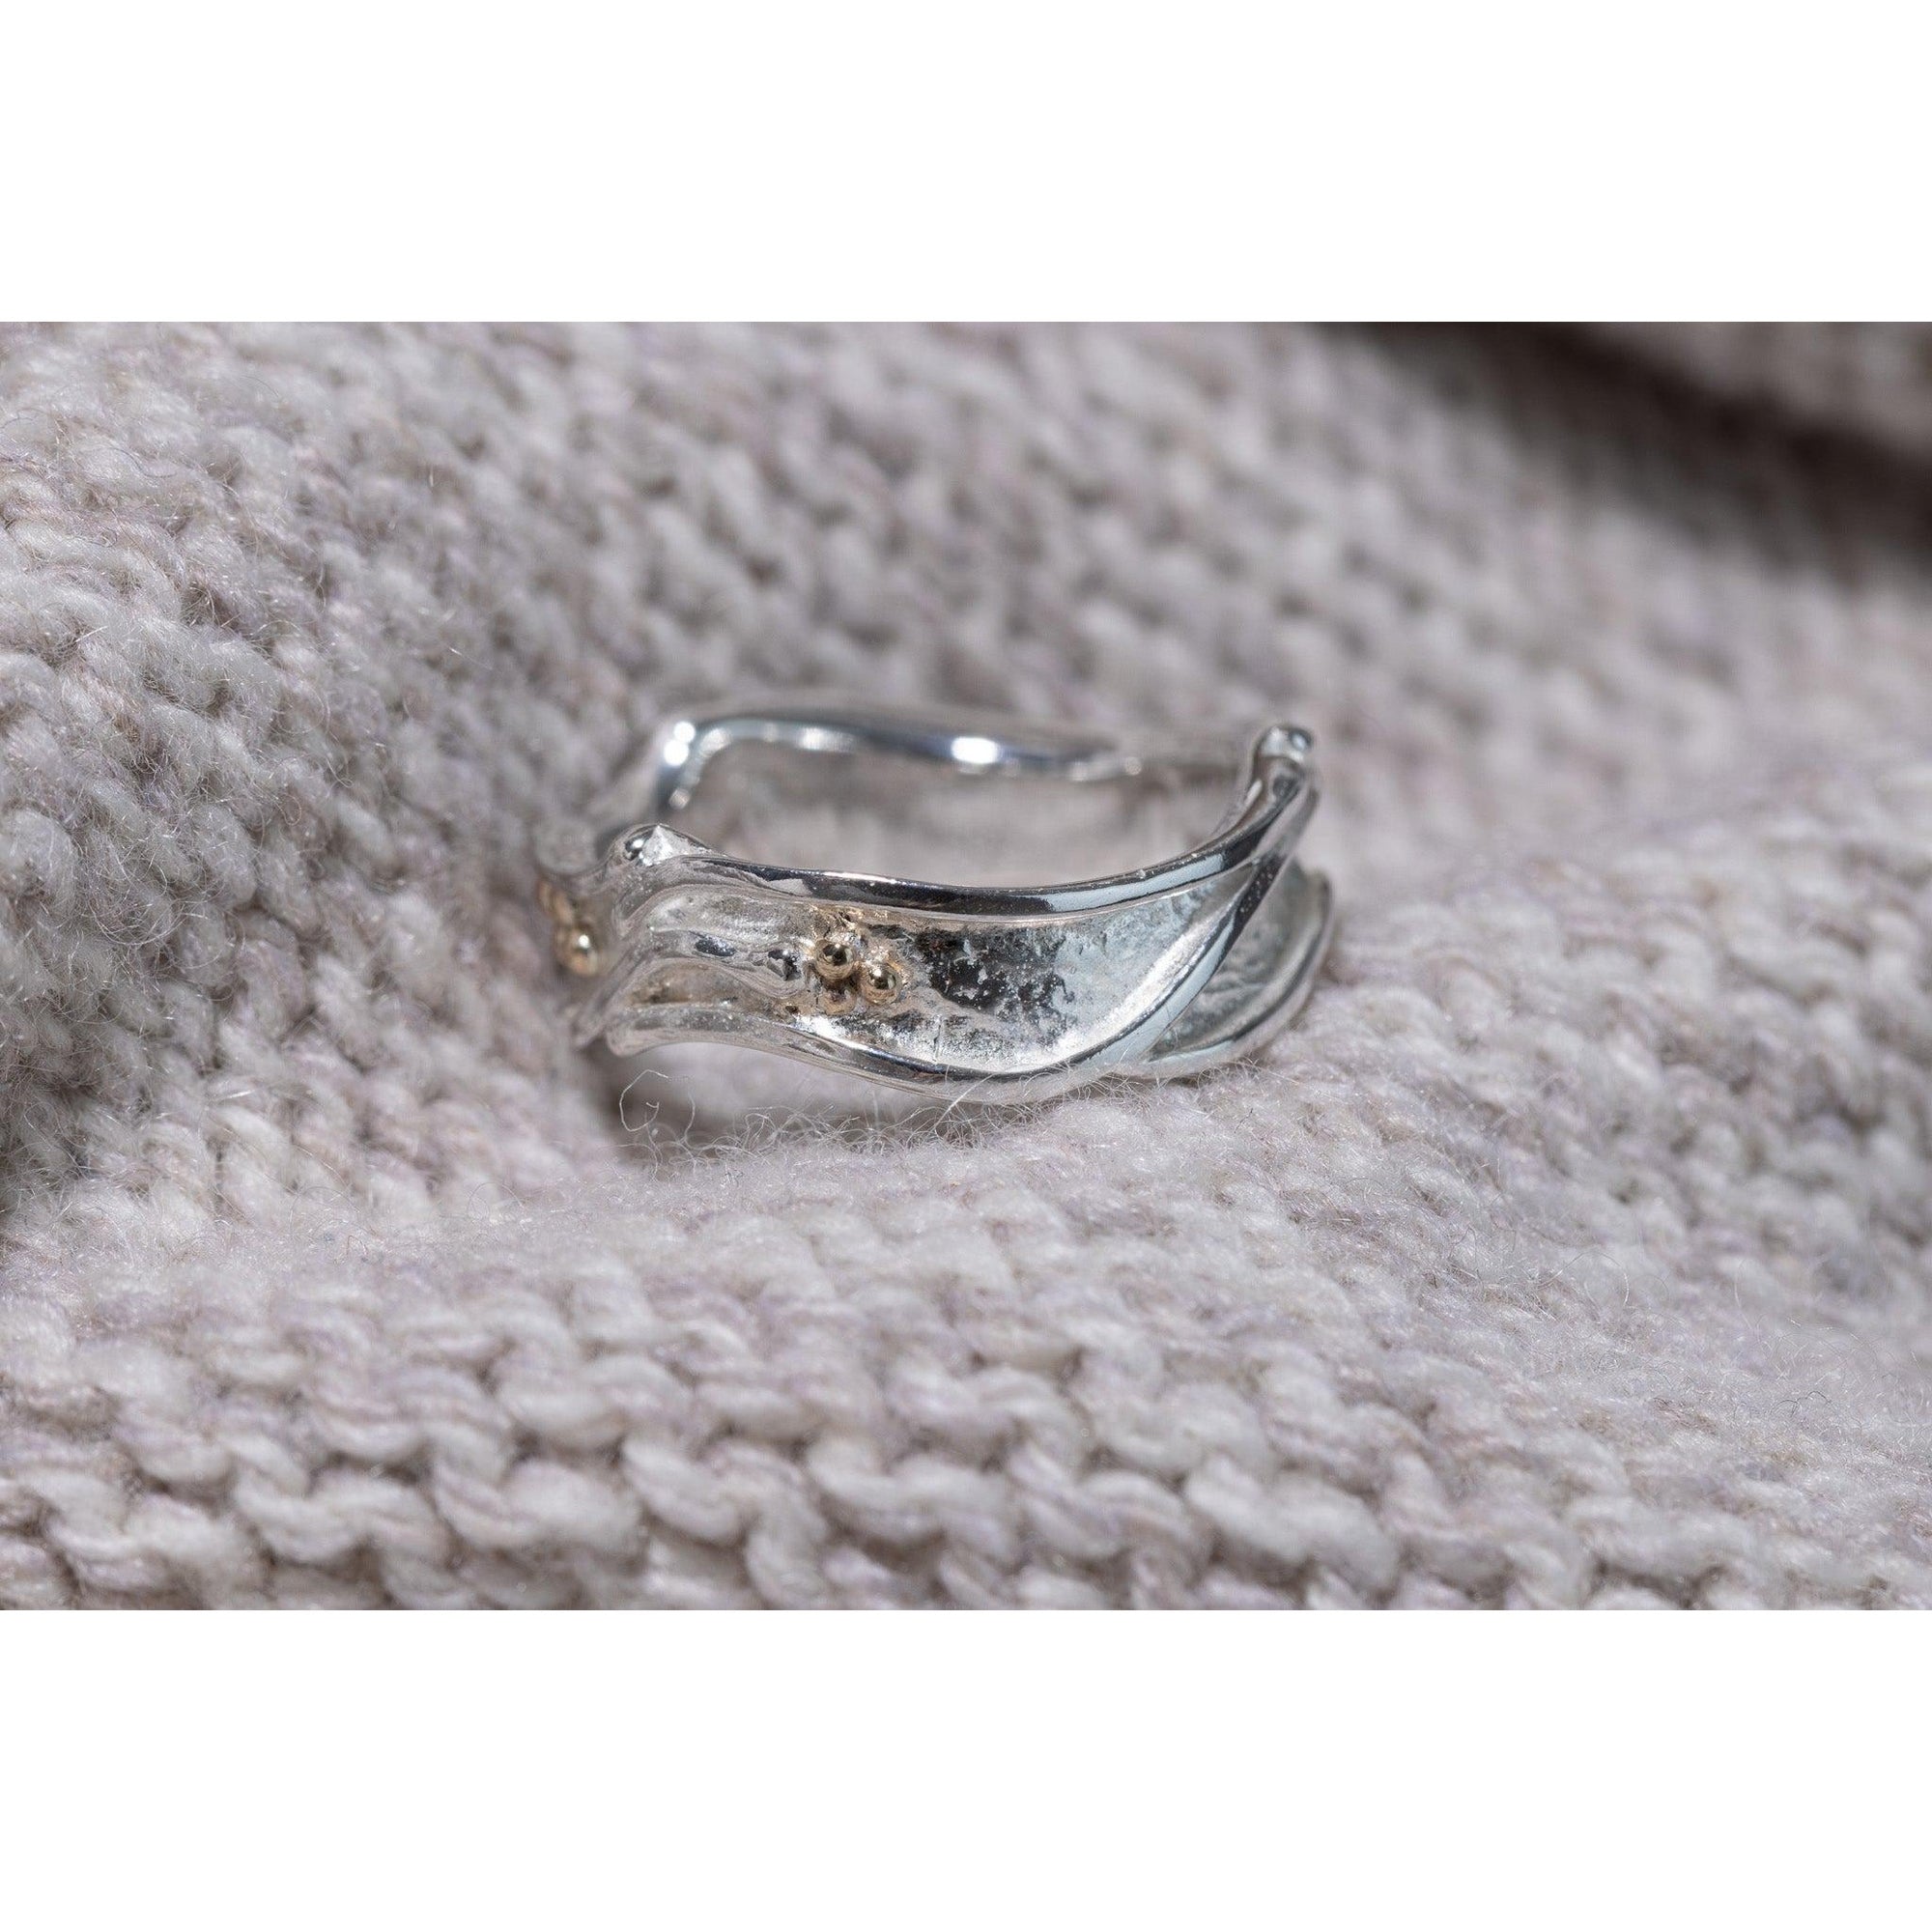 'LG56 - Silver Ring with 9ct Gold' by Les Grimshaw, available at Padstow Gallery, Cornwall